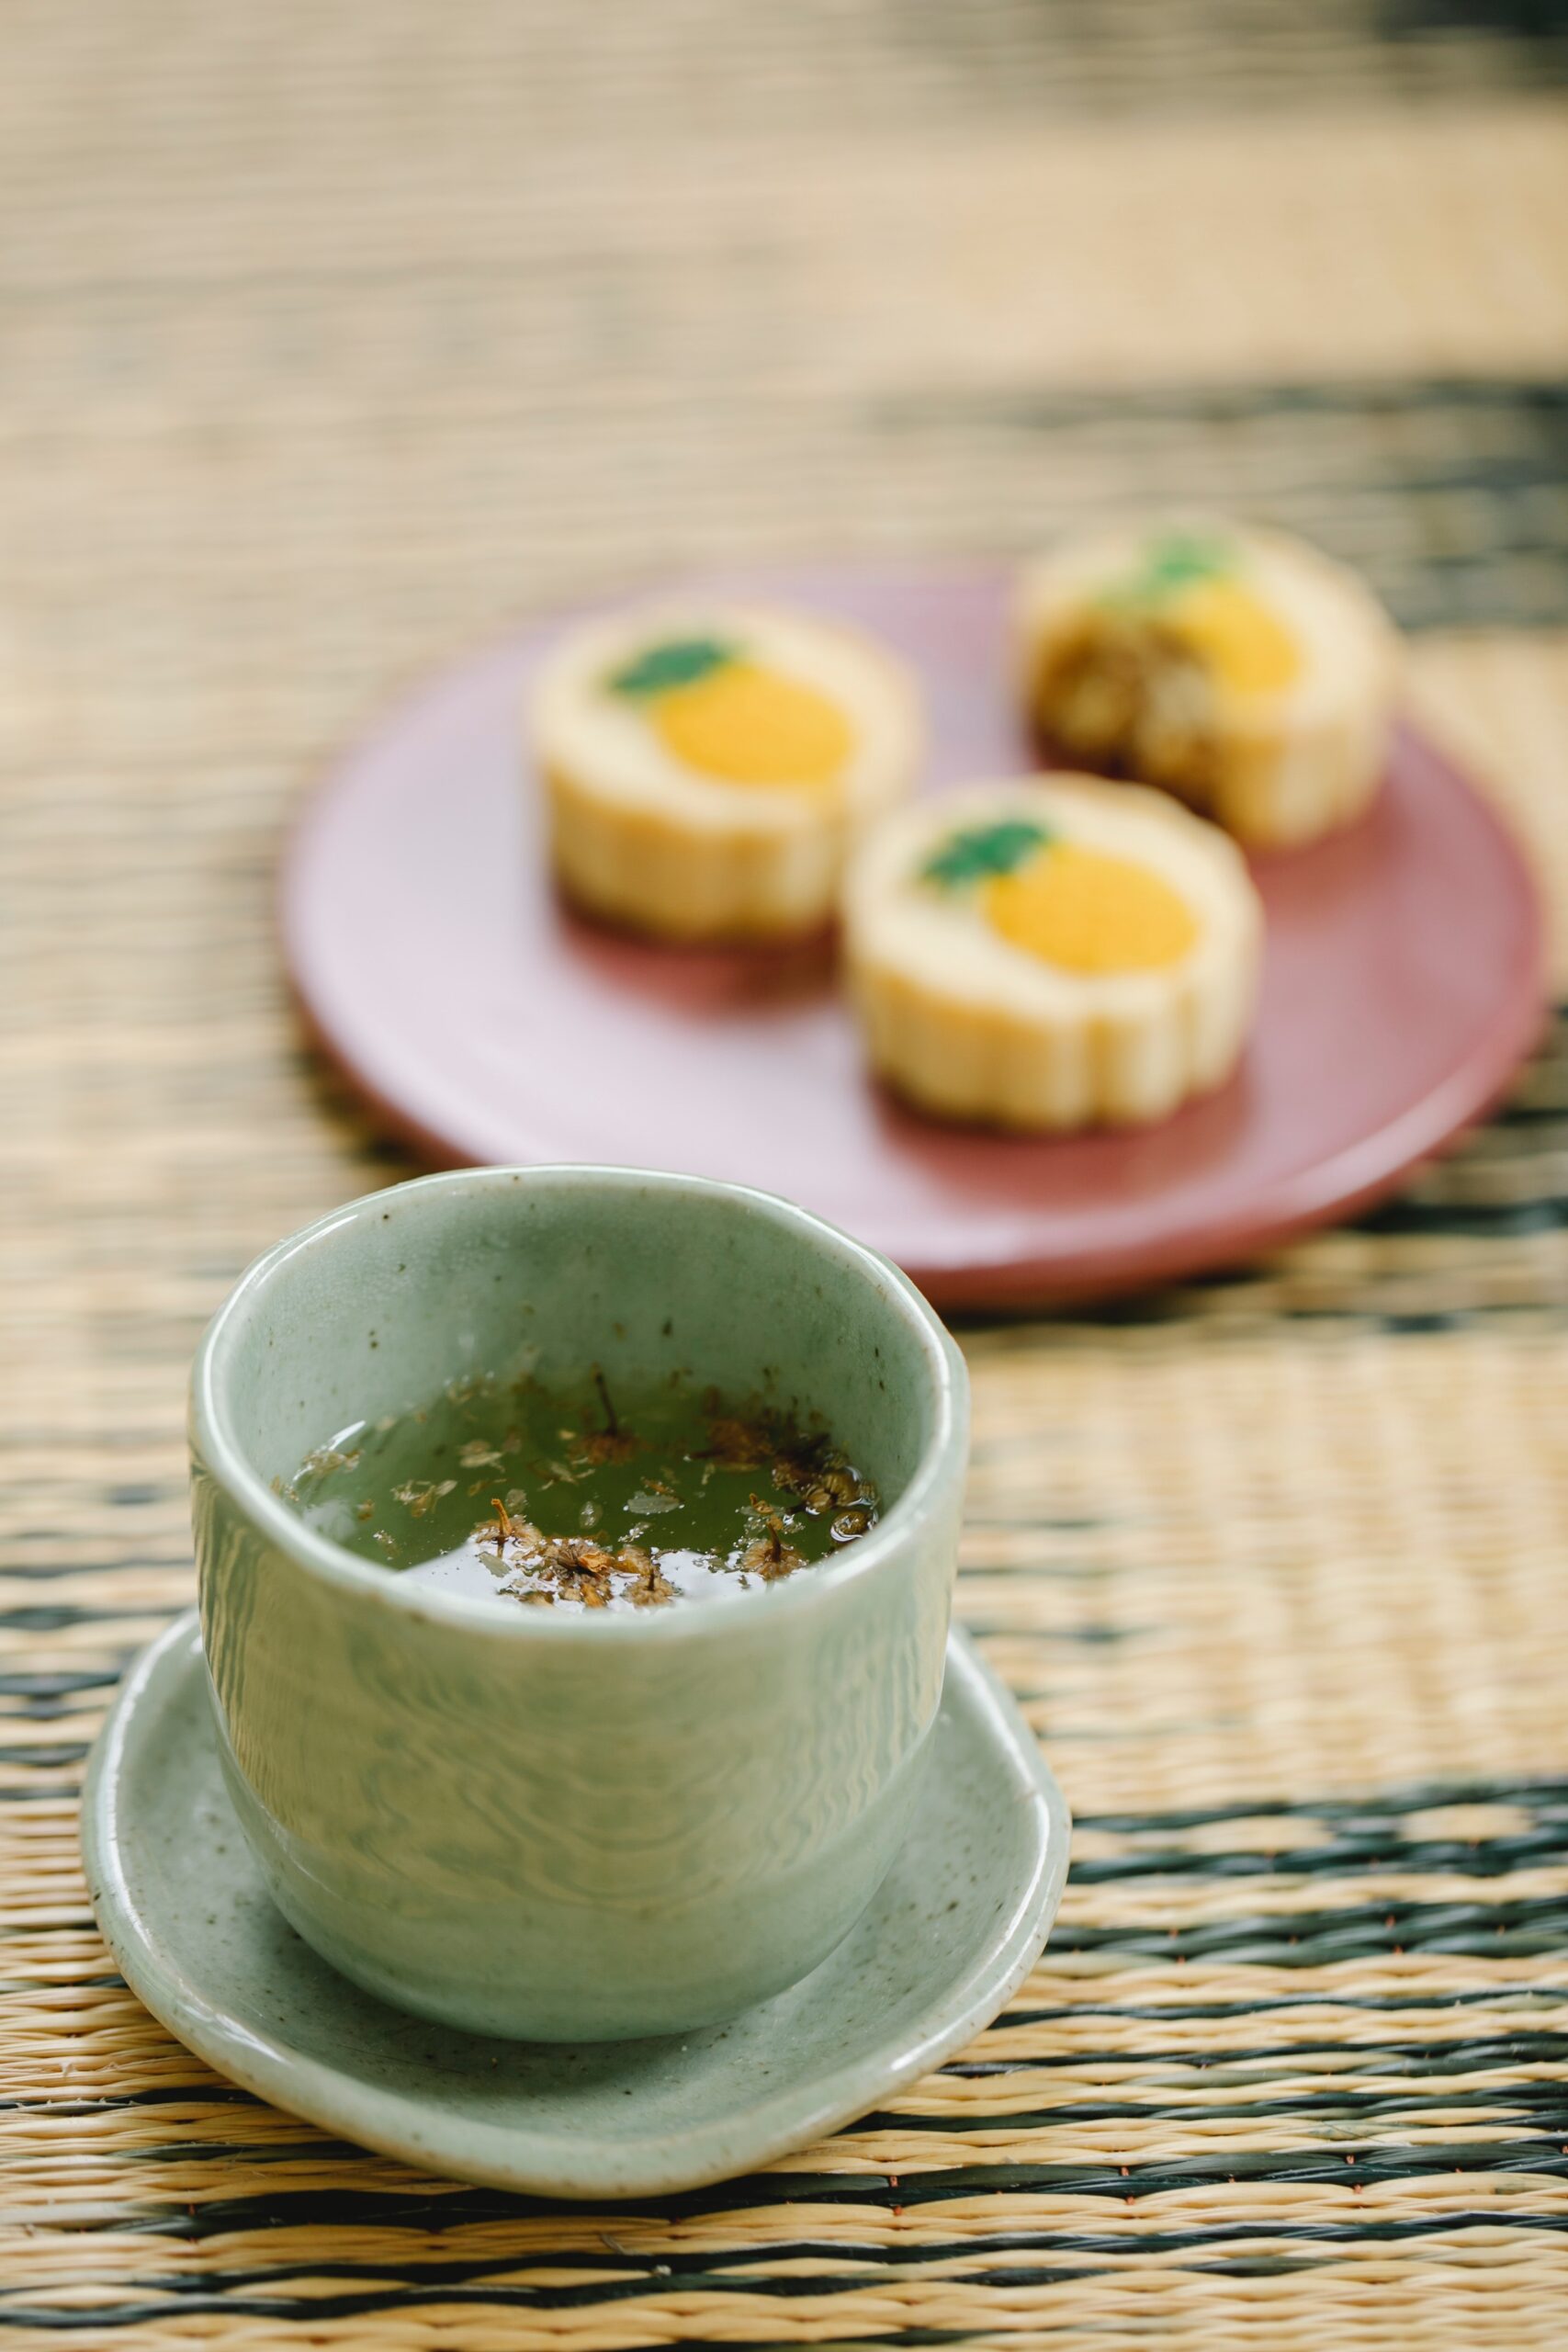 Green-tea-with-a-sweet-treat-on-the-table